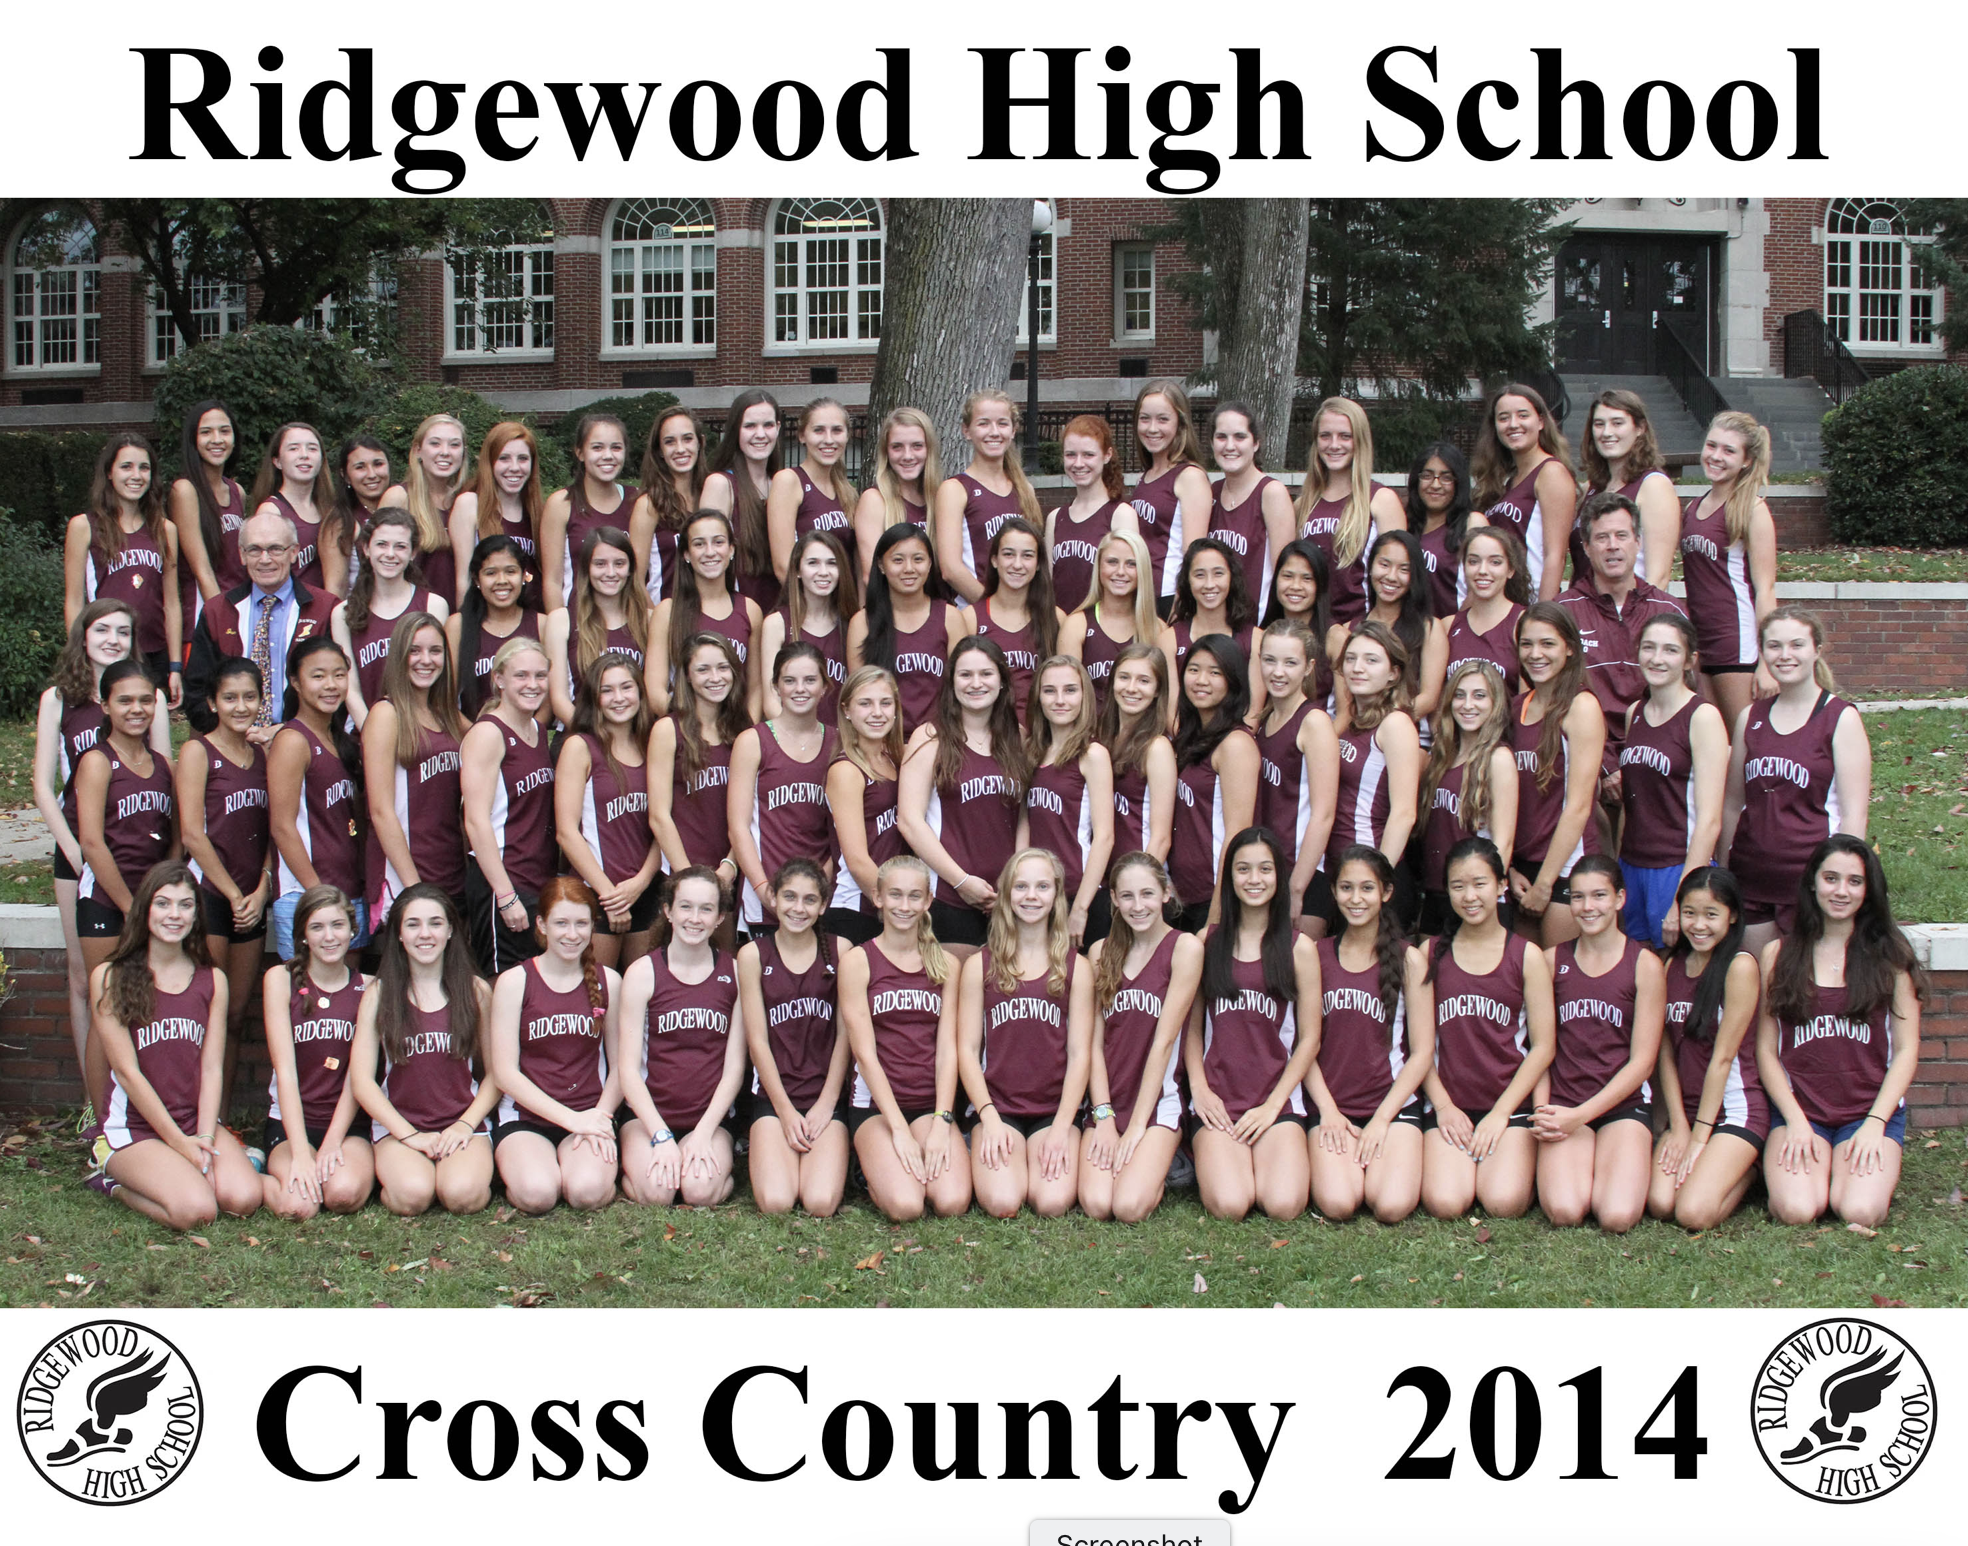 2014 Girls’ Cross Country TeamPhoto by Jacob Brown